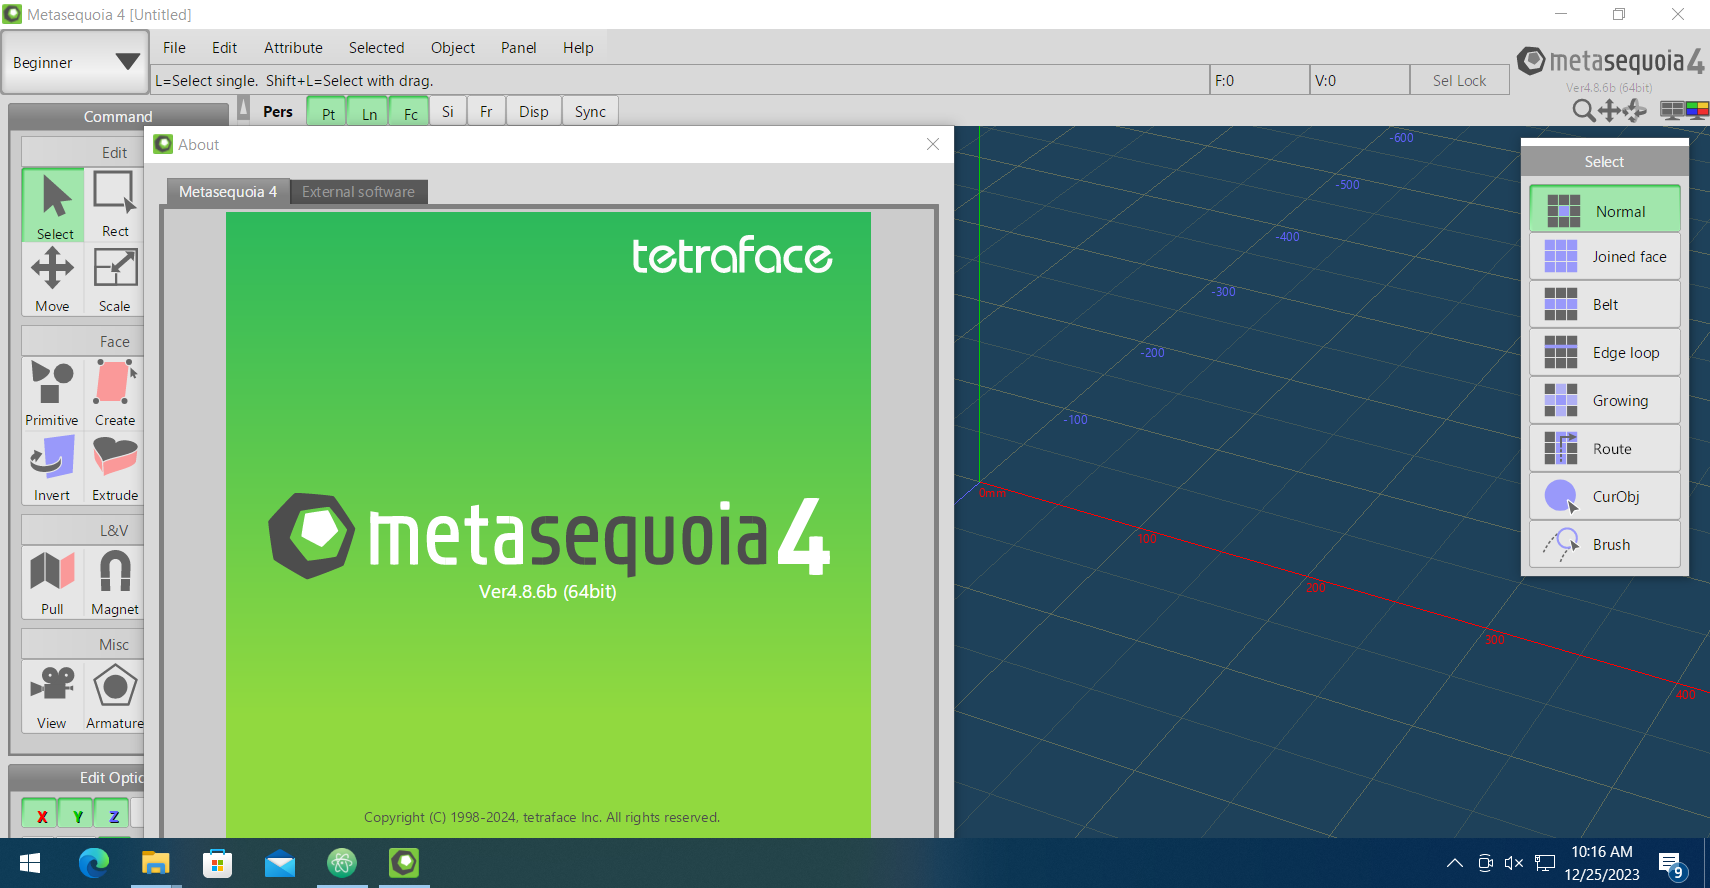 Working with Tetraface Inc Metasequoia 4.8.6b full license